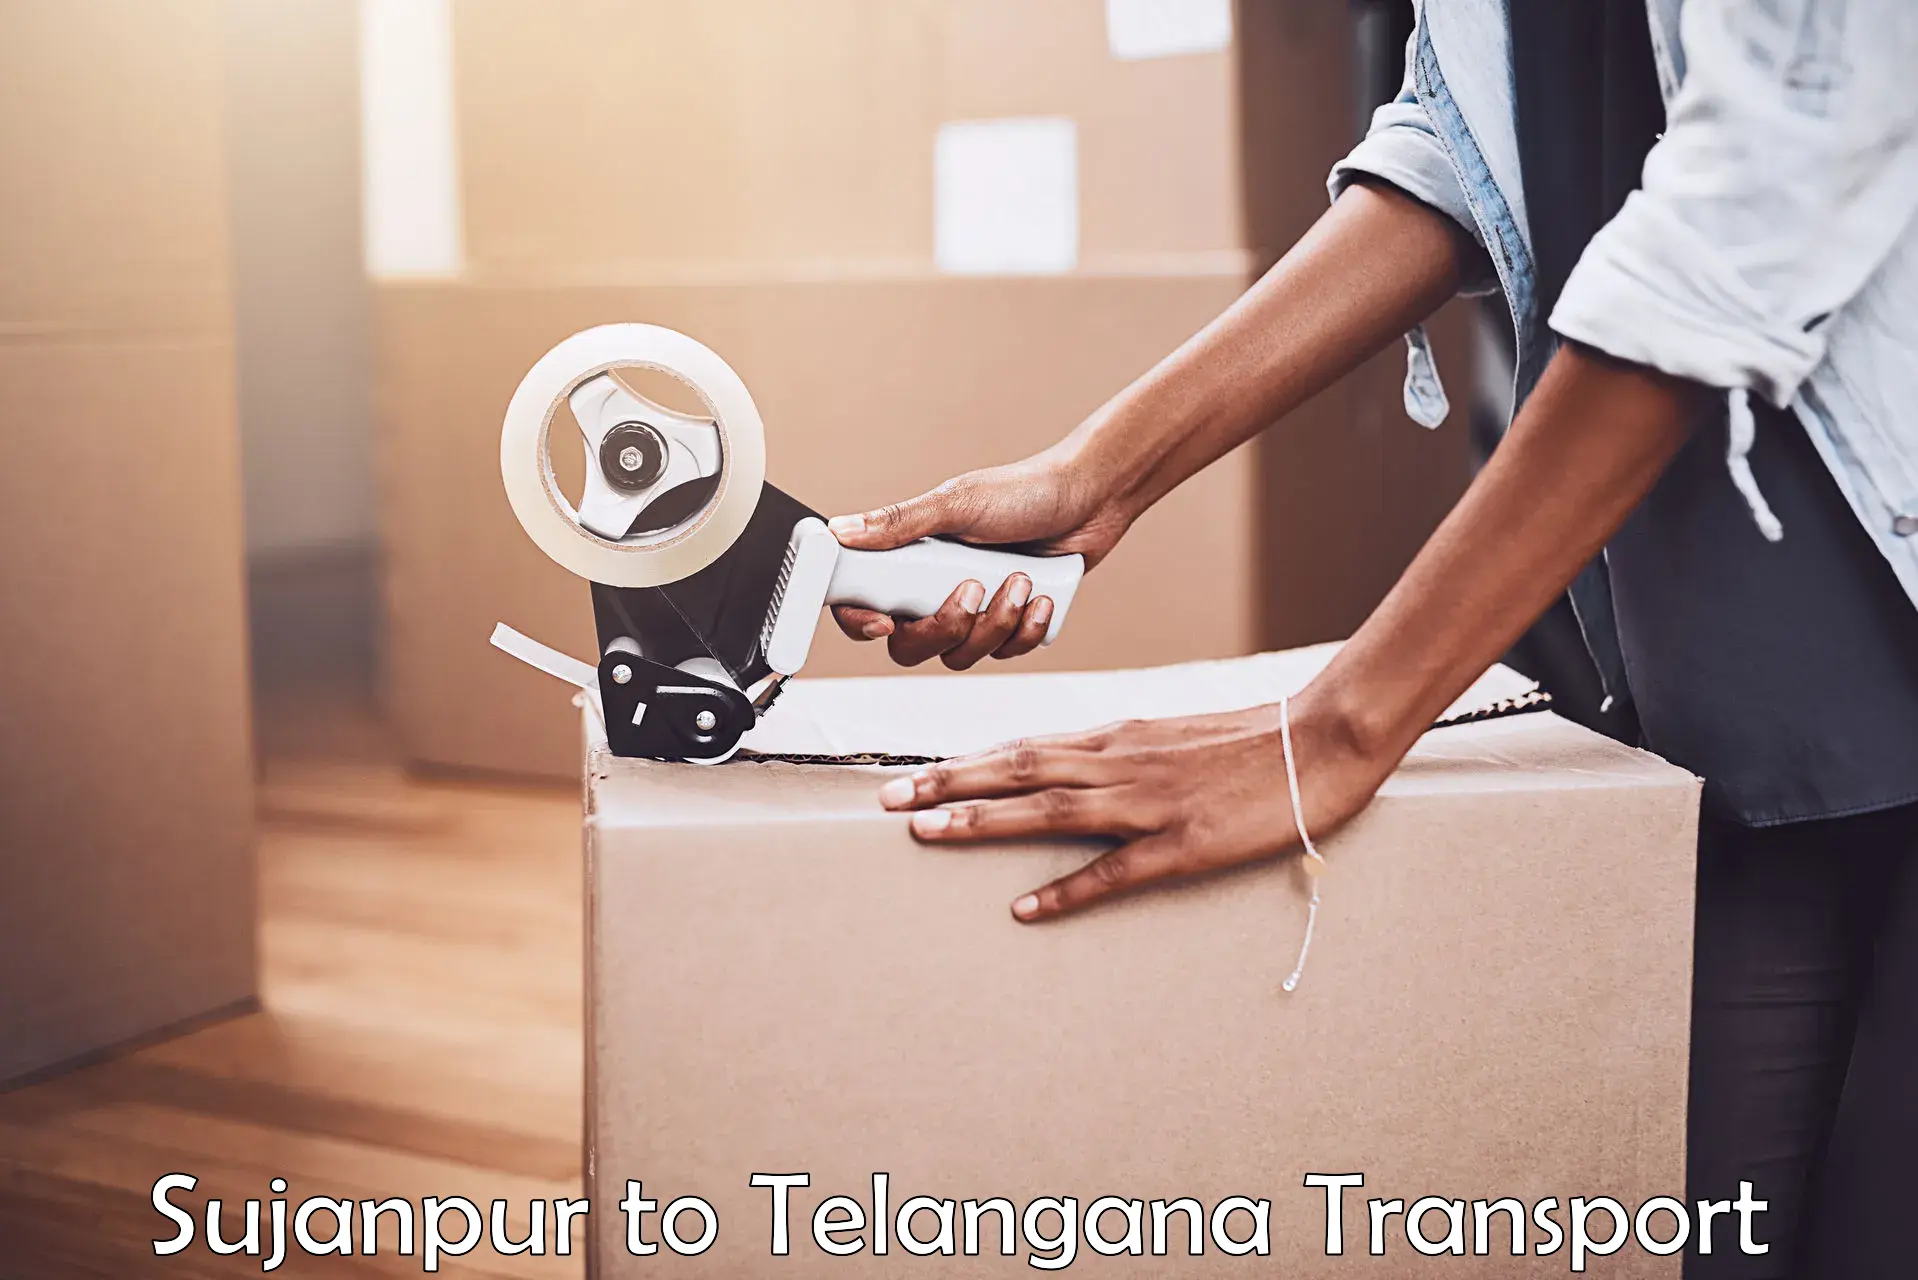 Road transport online services Sujanpur to Netrang